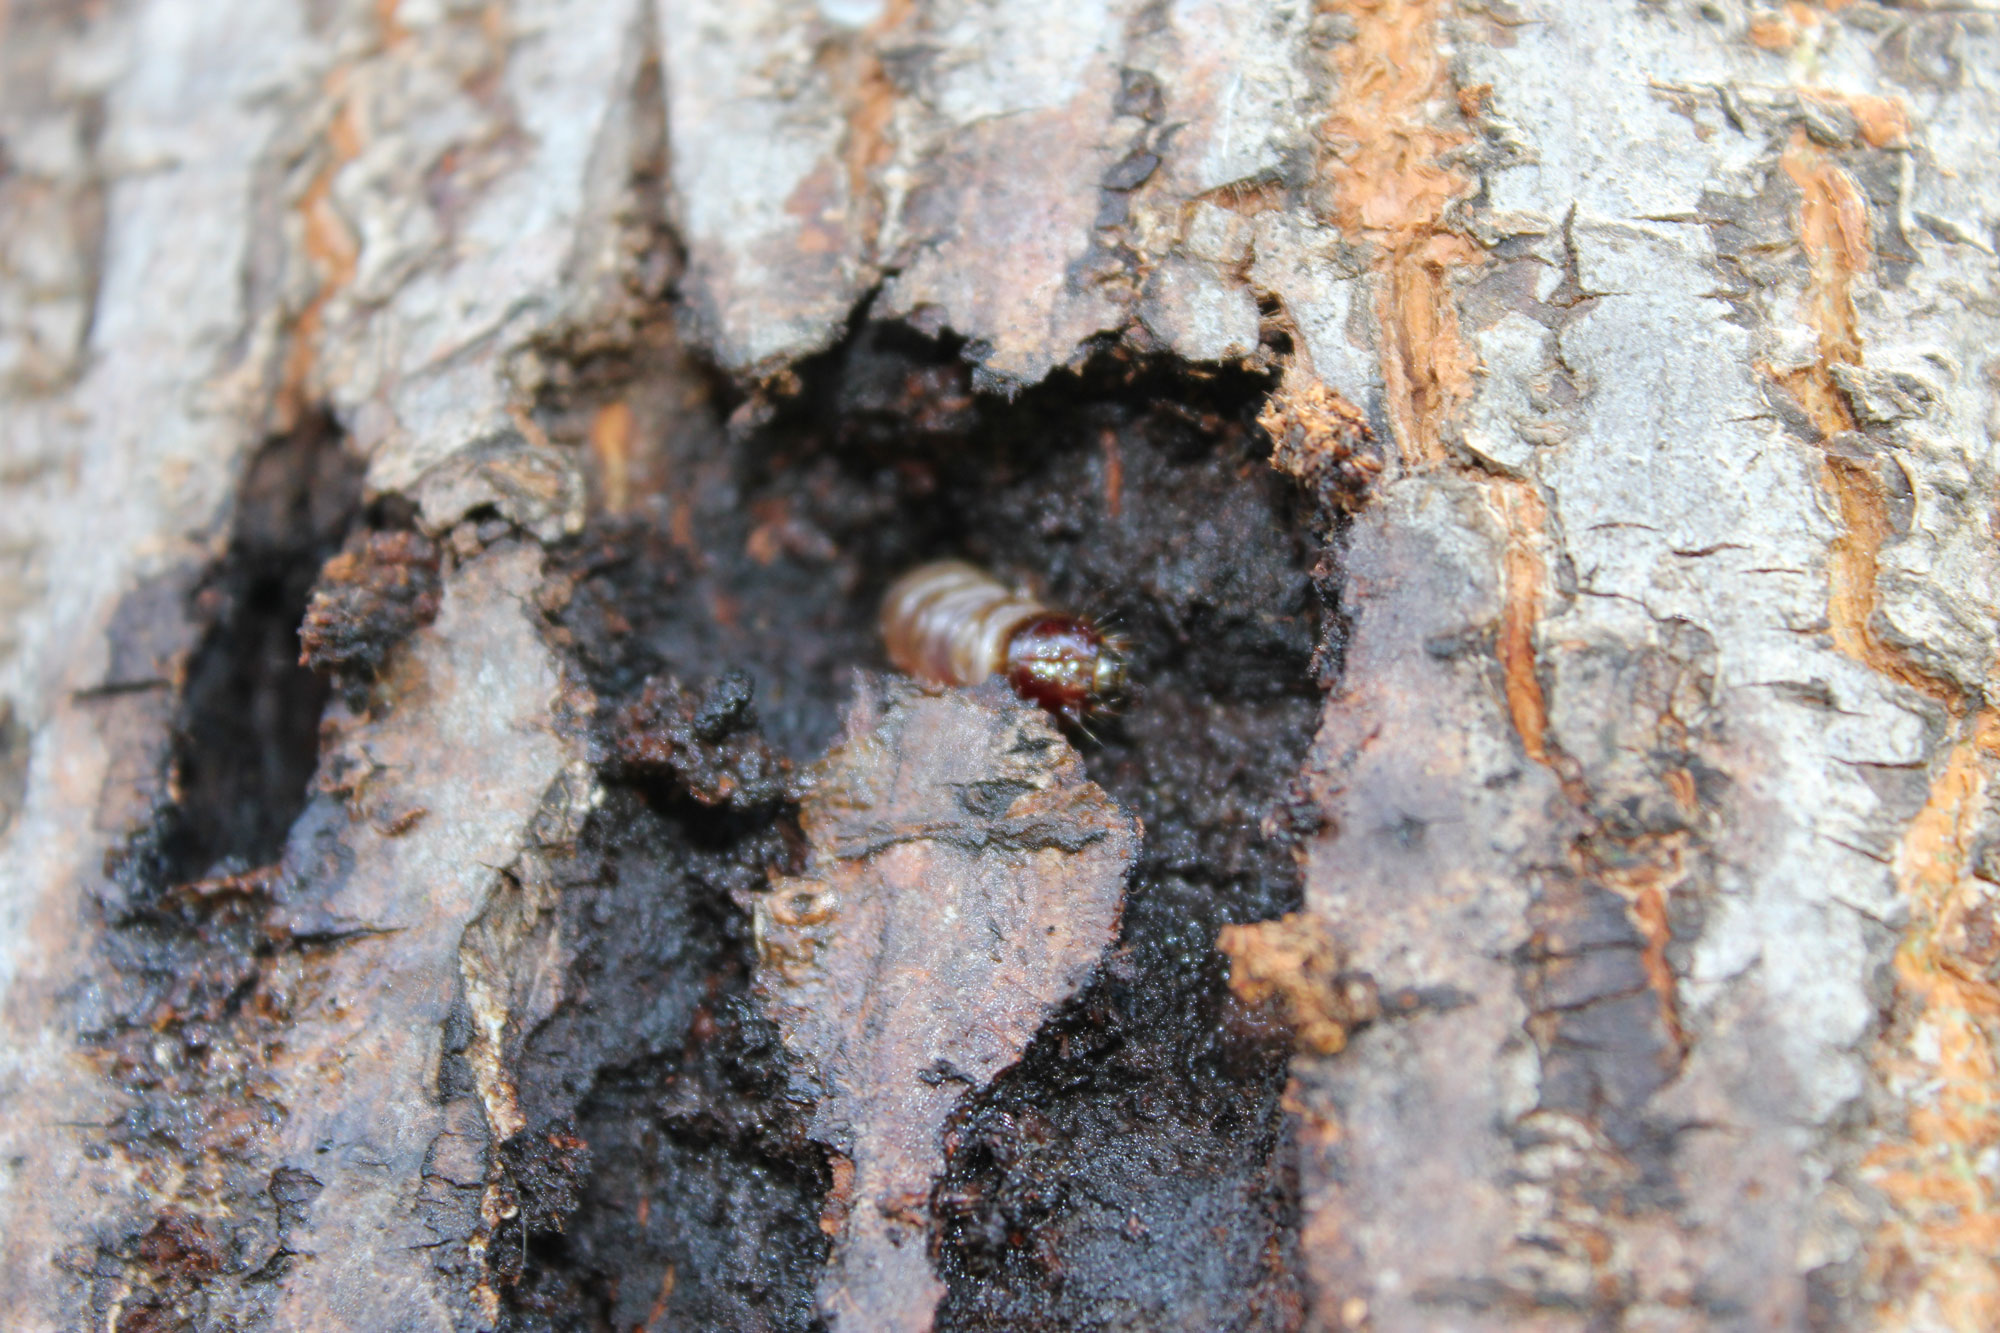 A borer exposed during treatment 